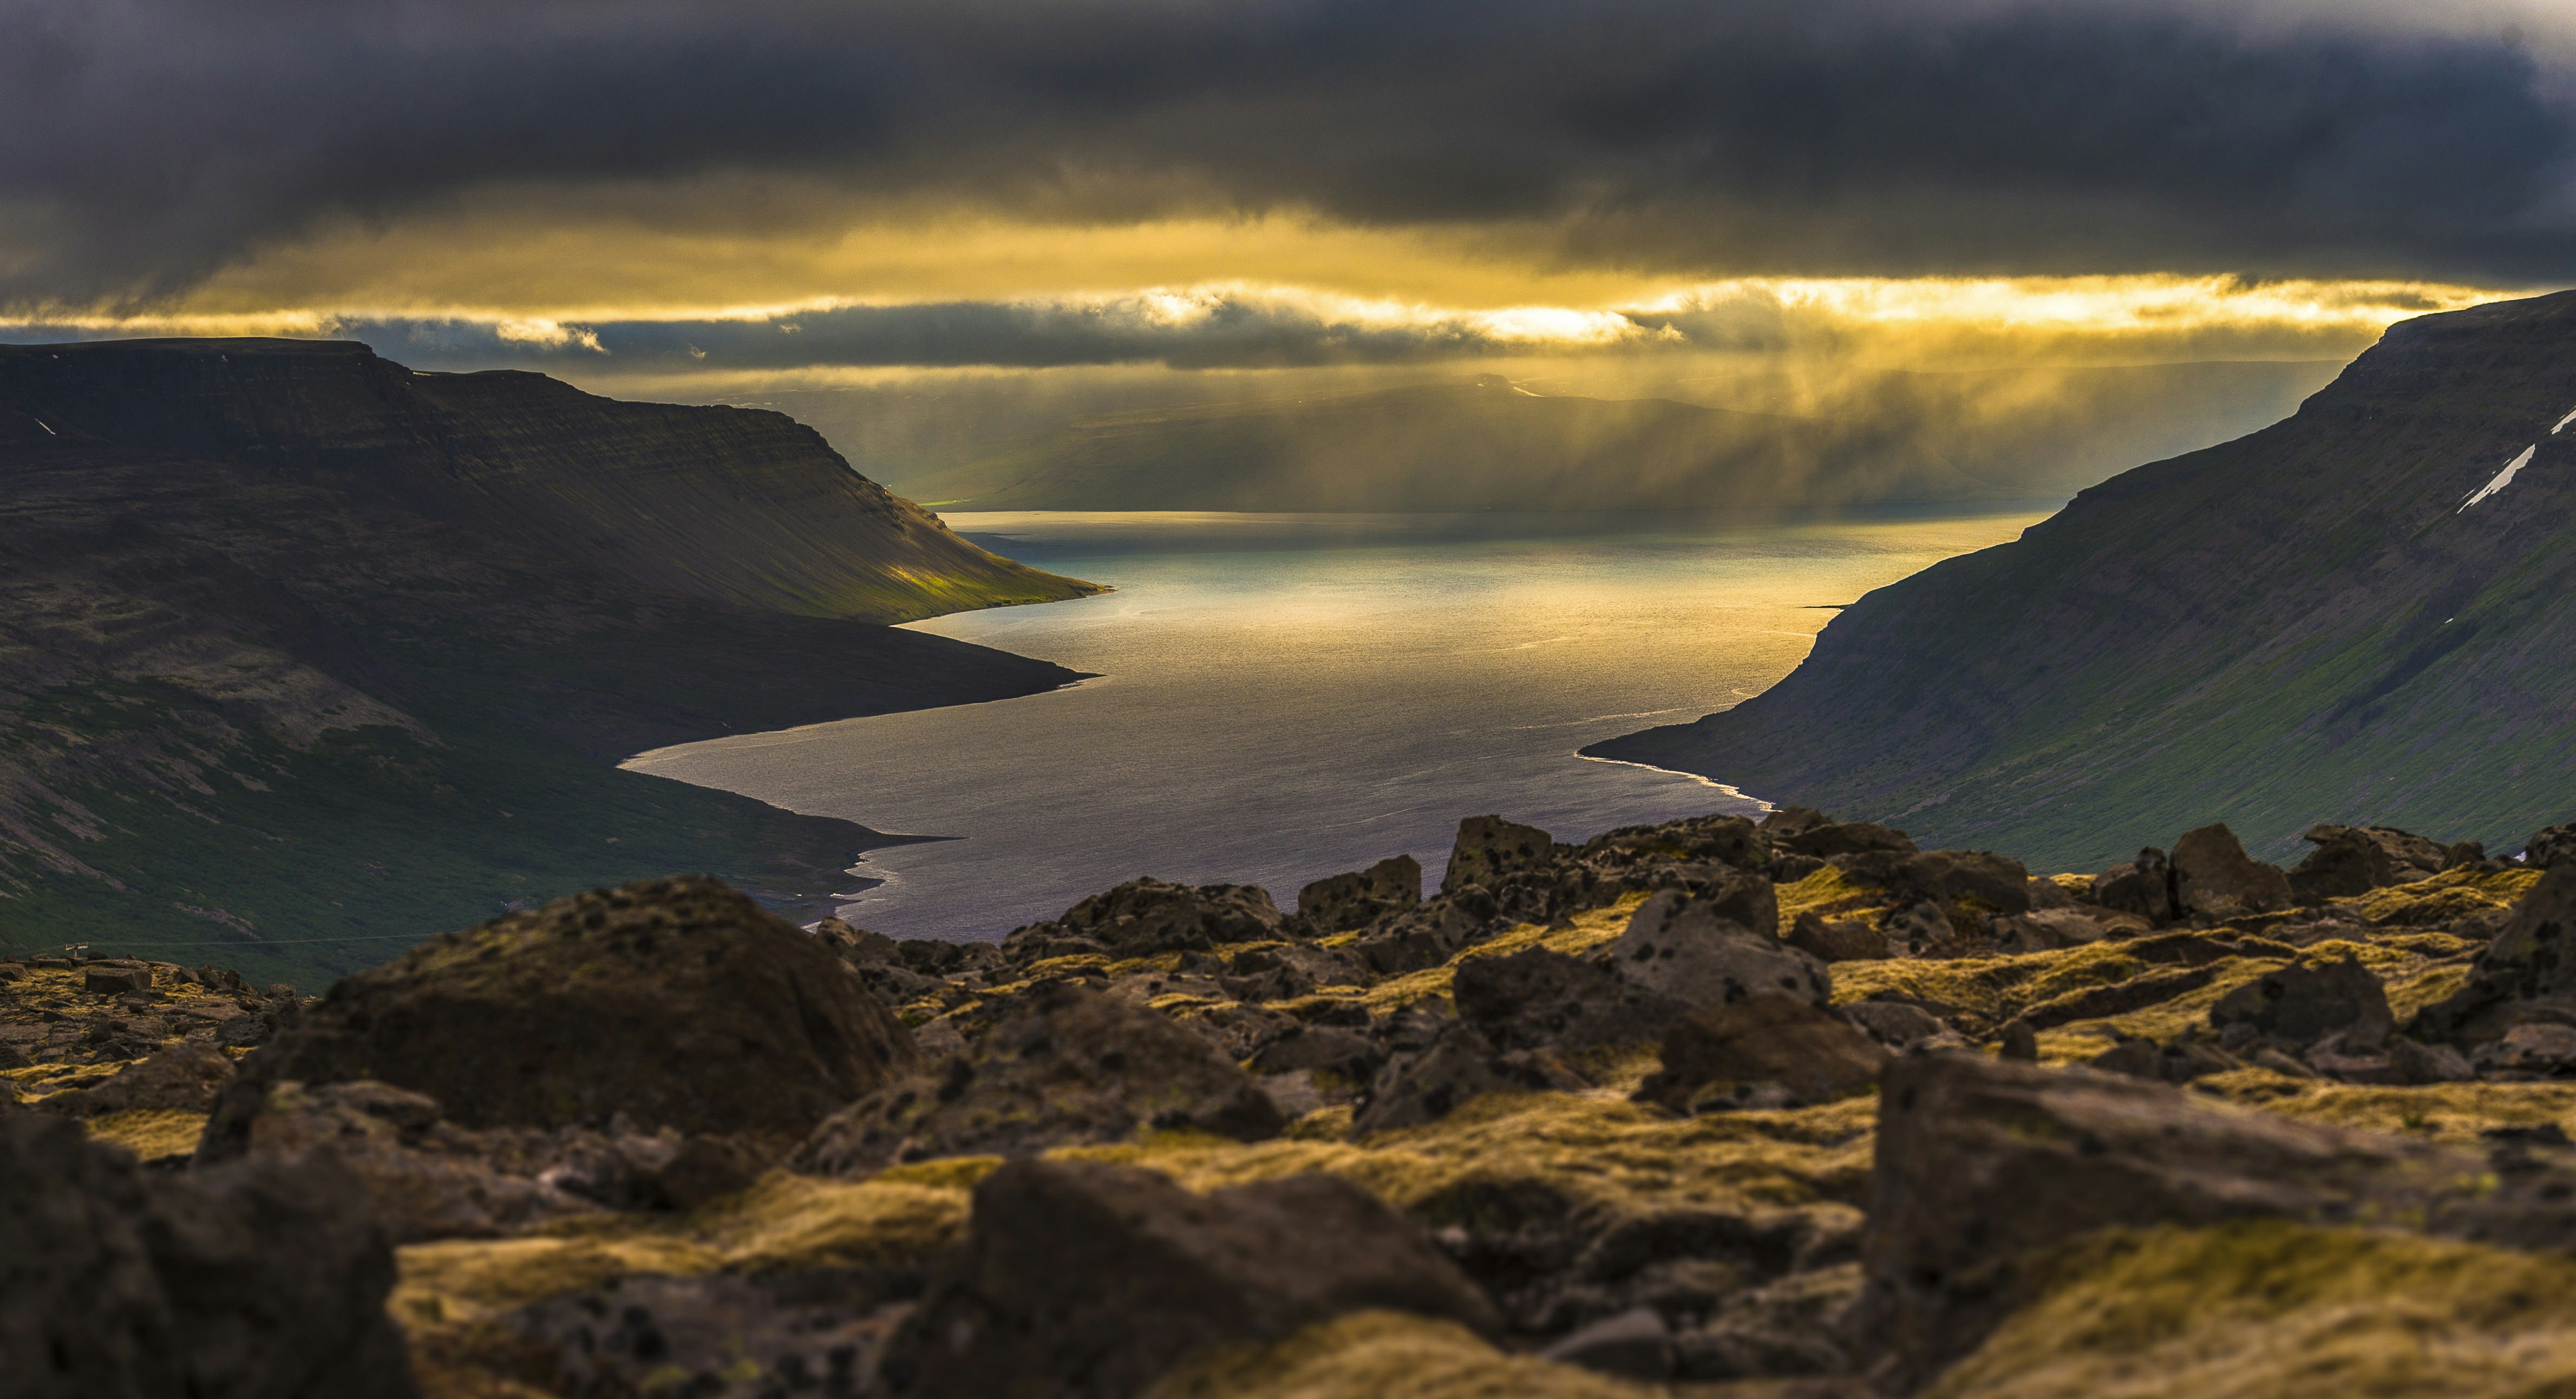 Looking over rocks towards fjord scenery in the Westfjords, Iceland, with sunset over the sea beyond.